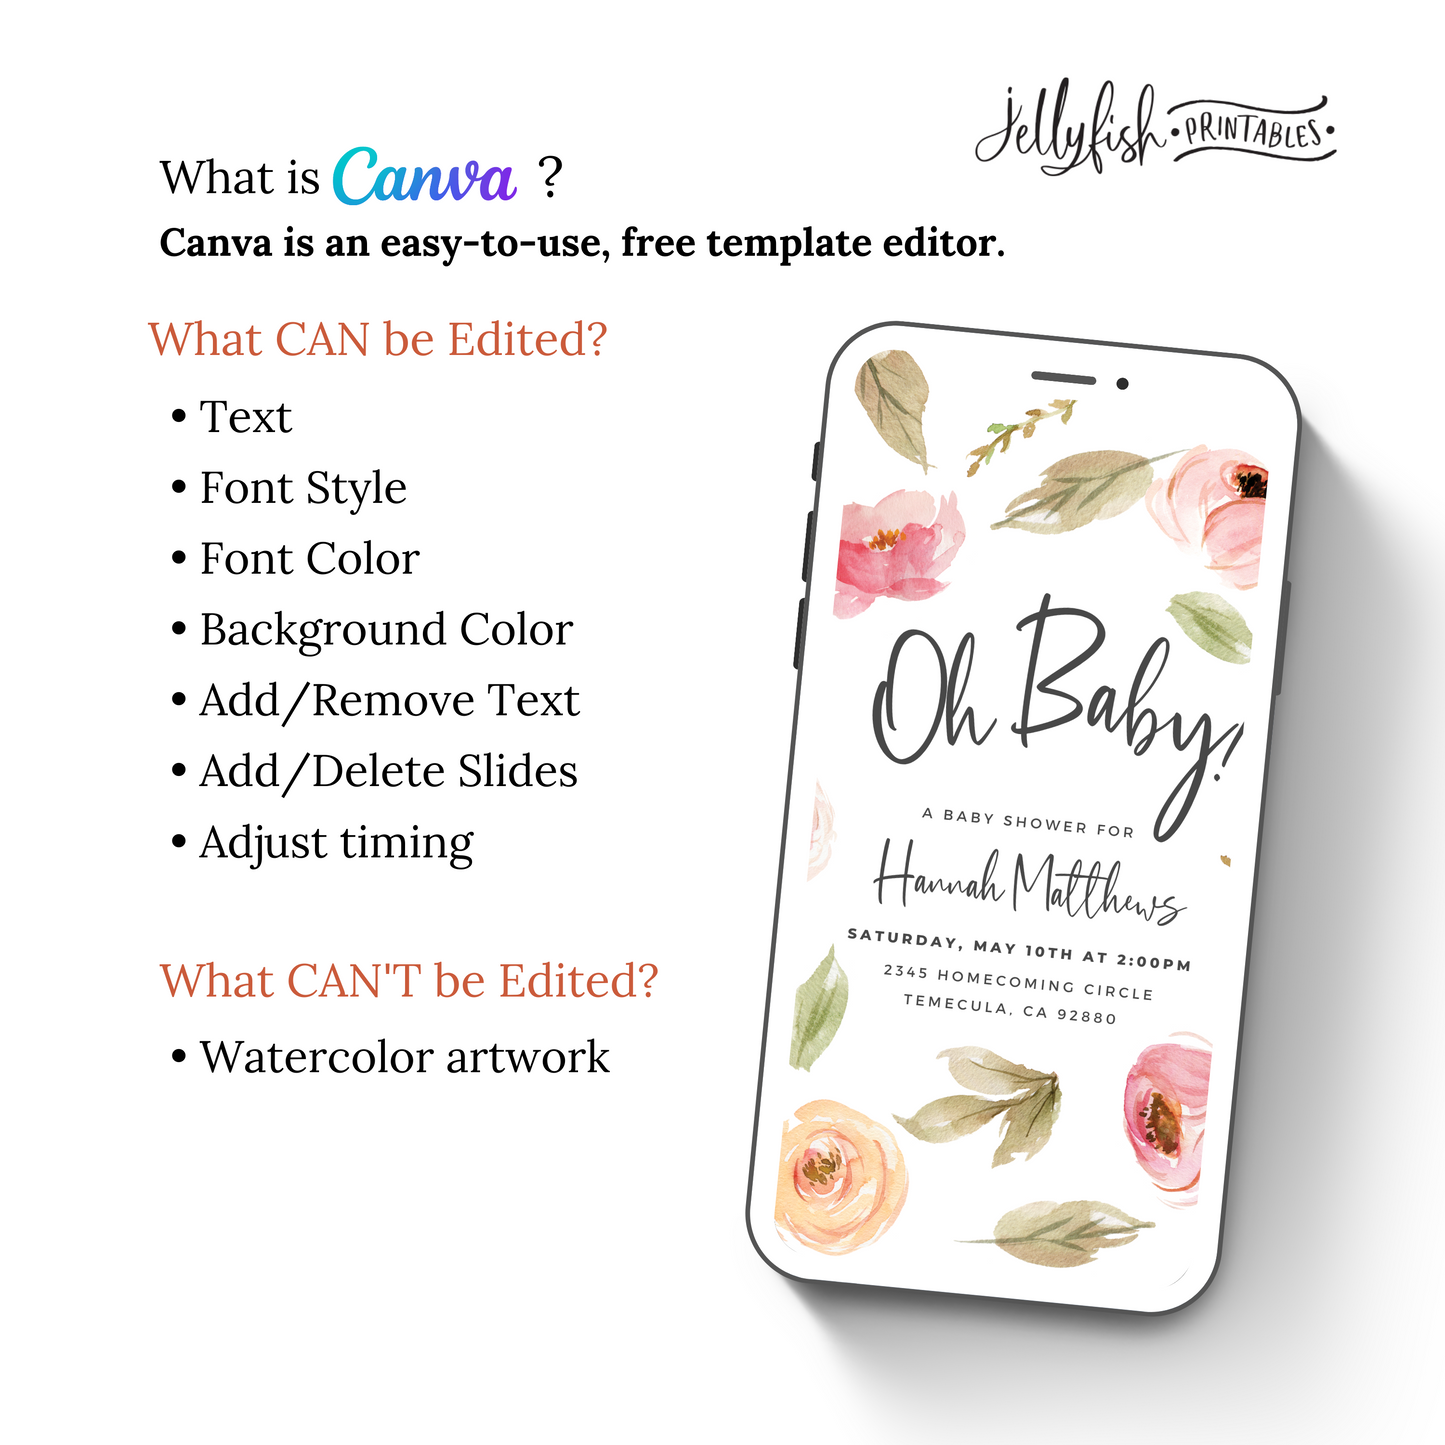 Oh Baby Shower Video Invitation Canva Template. Send Today!